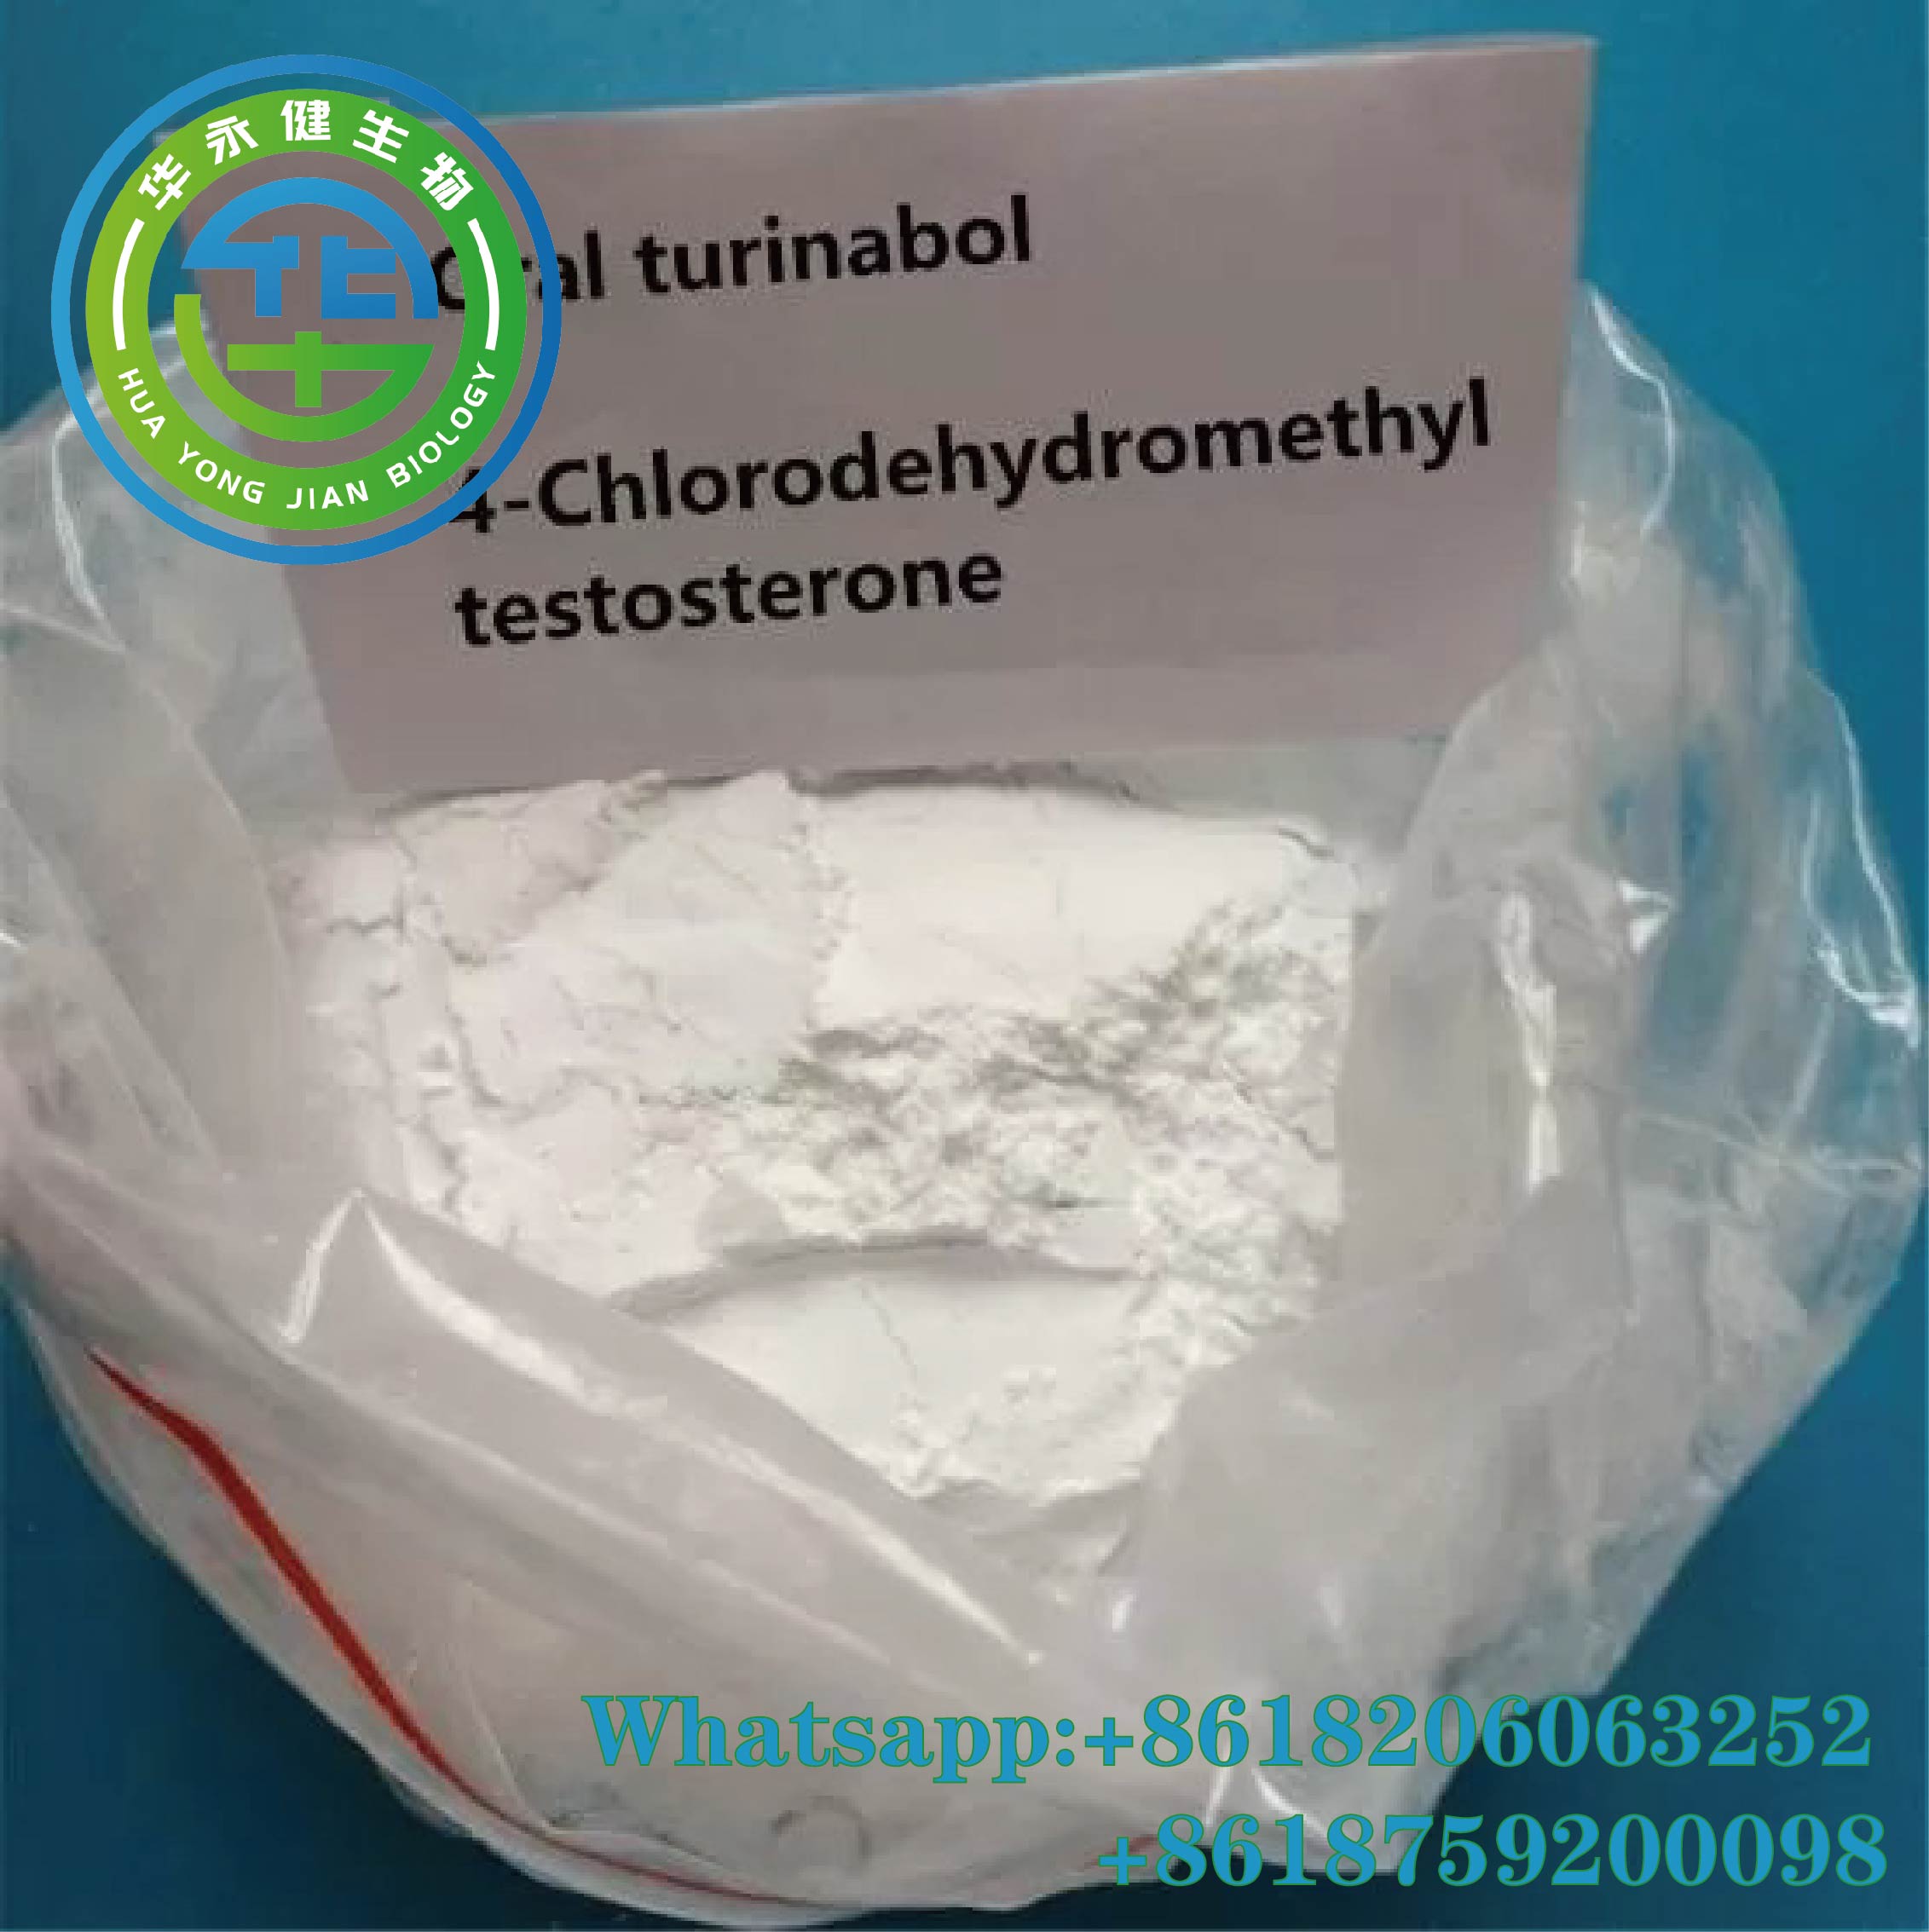 Oral Turinabol White / Almost White Crystalling Powder 4-Chlorodehydromethyltestosterone alang sa Big Muscle Building Featured Image